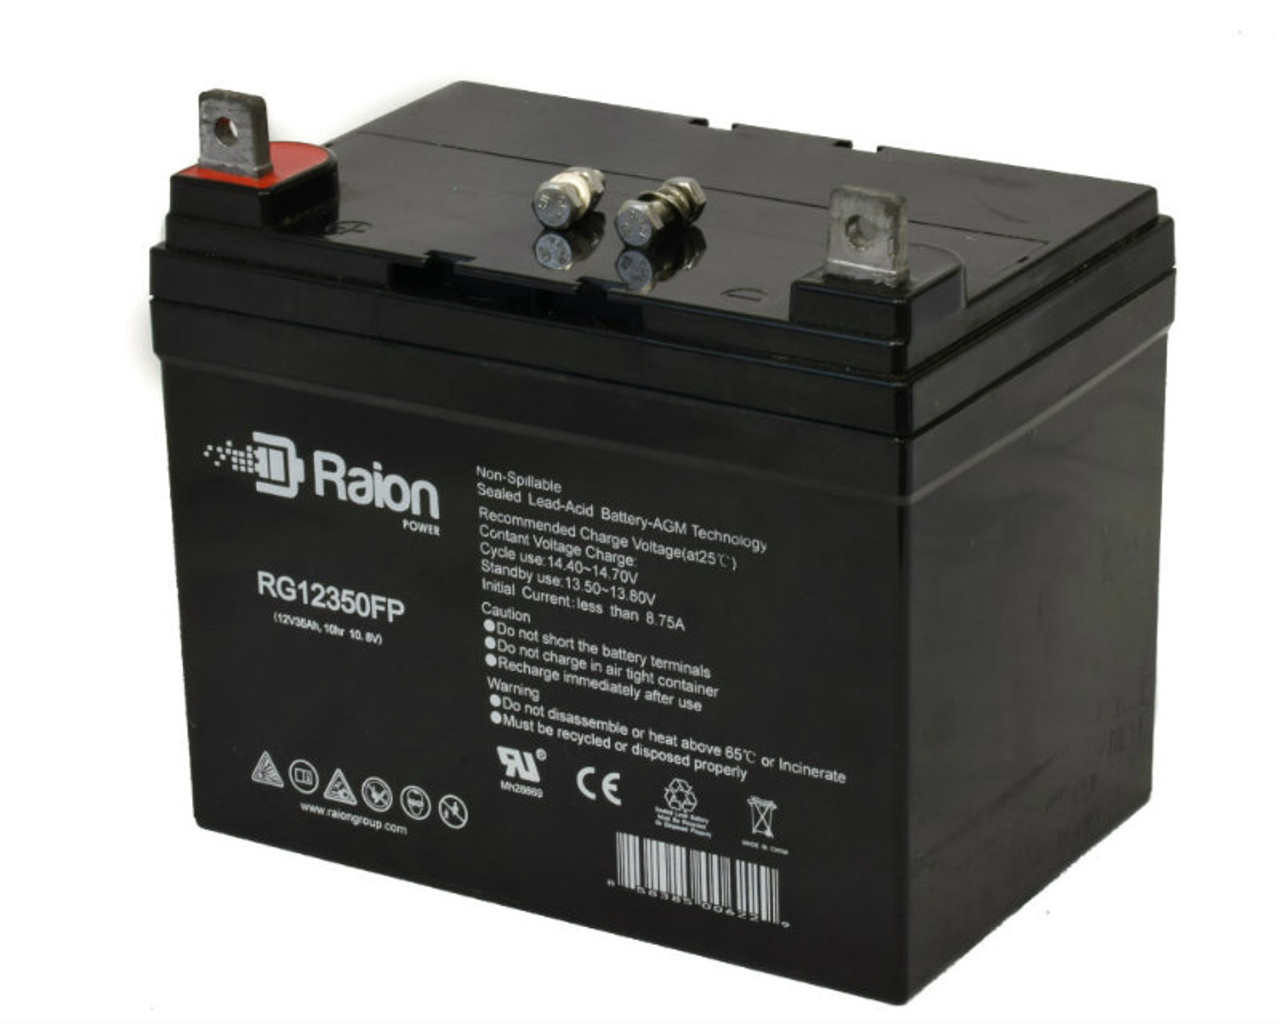 Raion Power Replacement 12V 35Ah Battery for Sure-way 1023 - 1 Pack